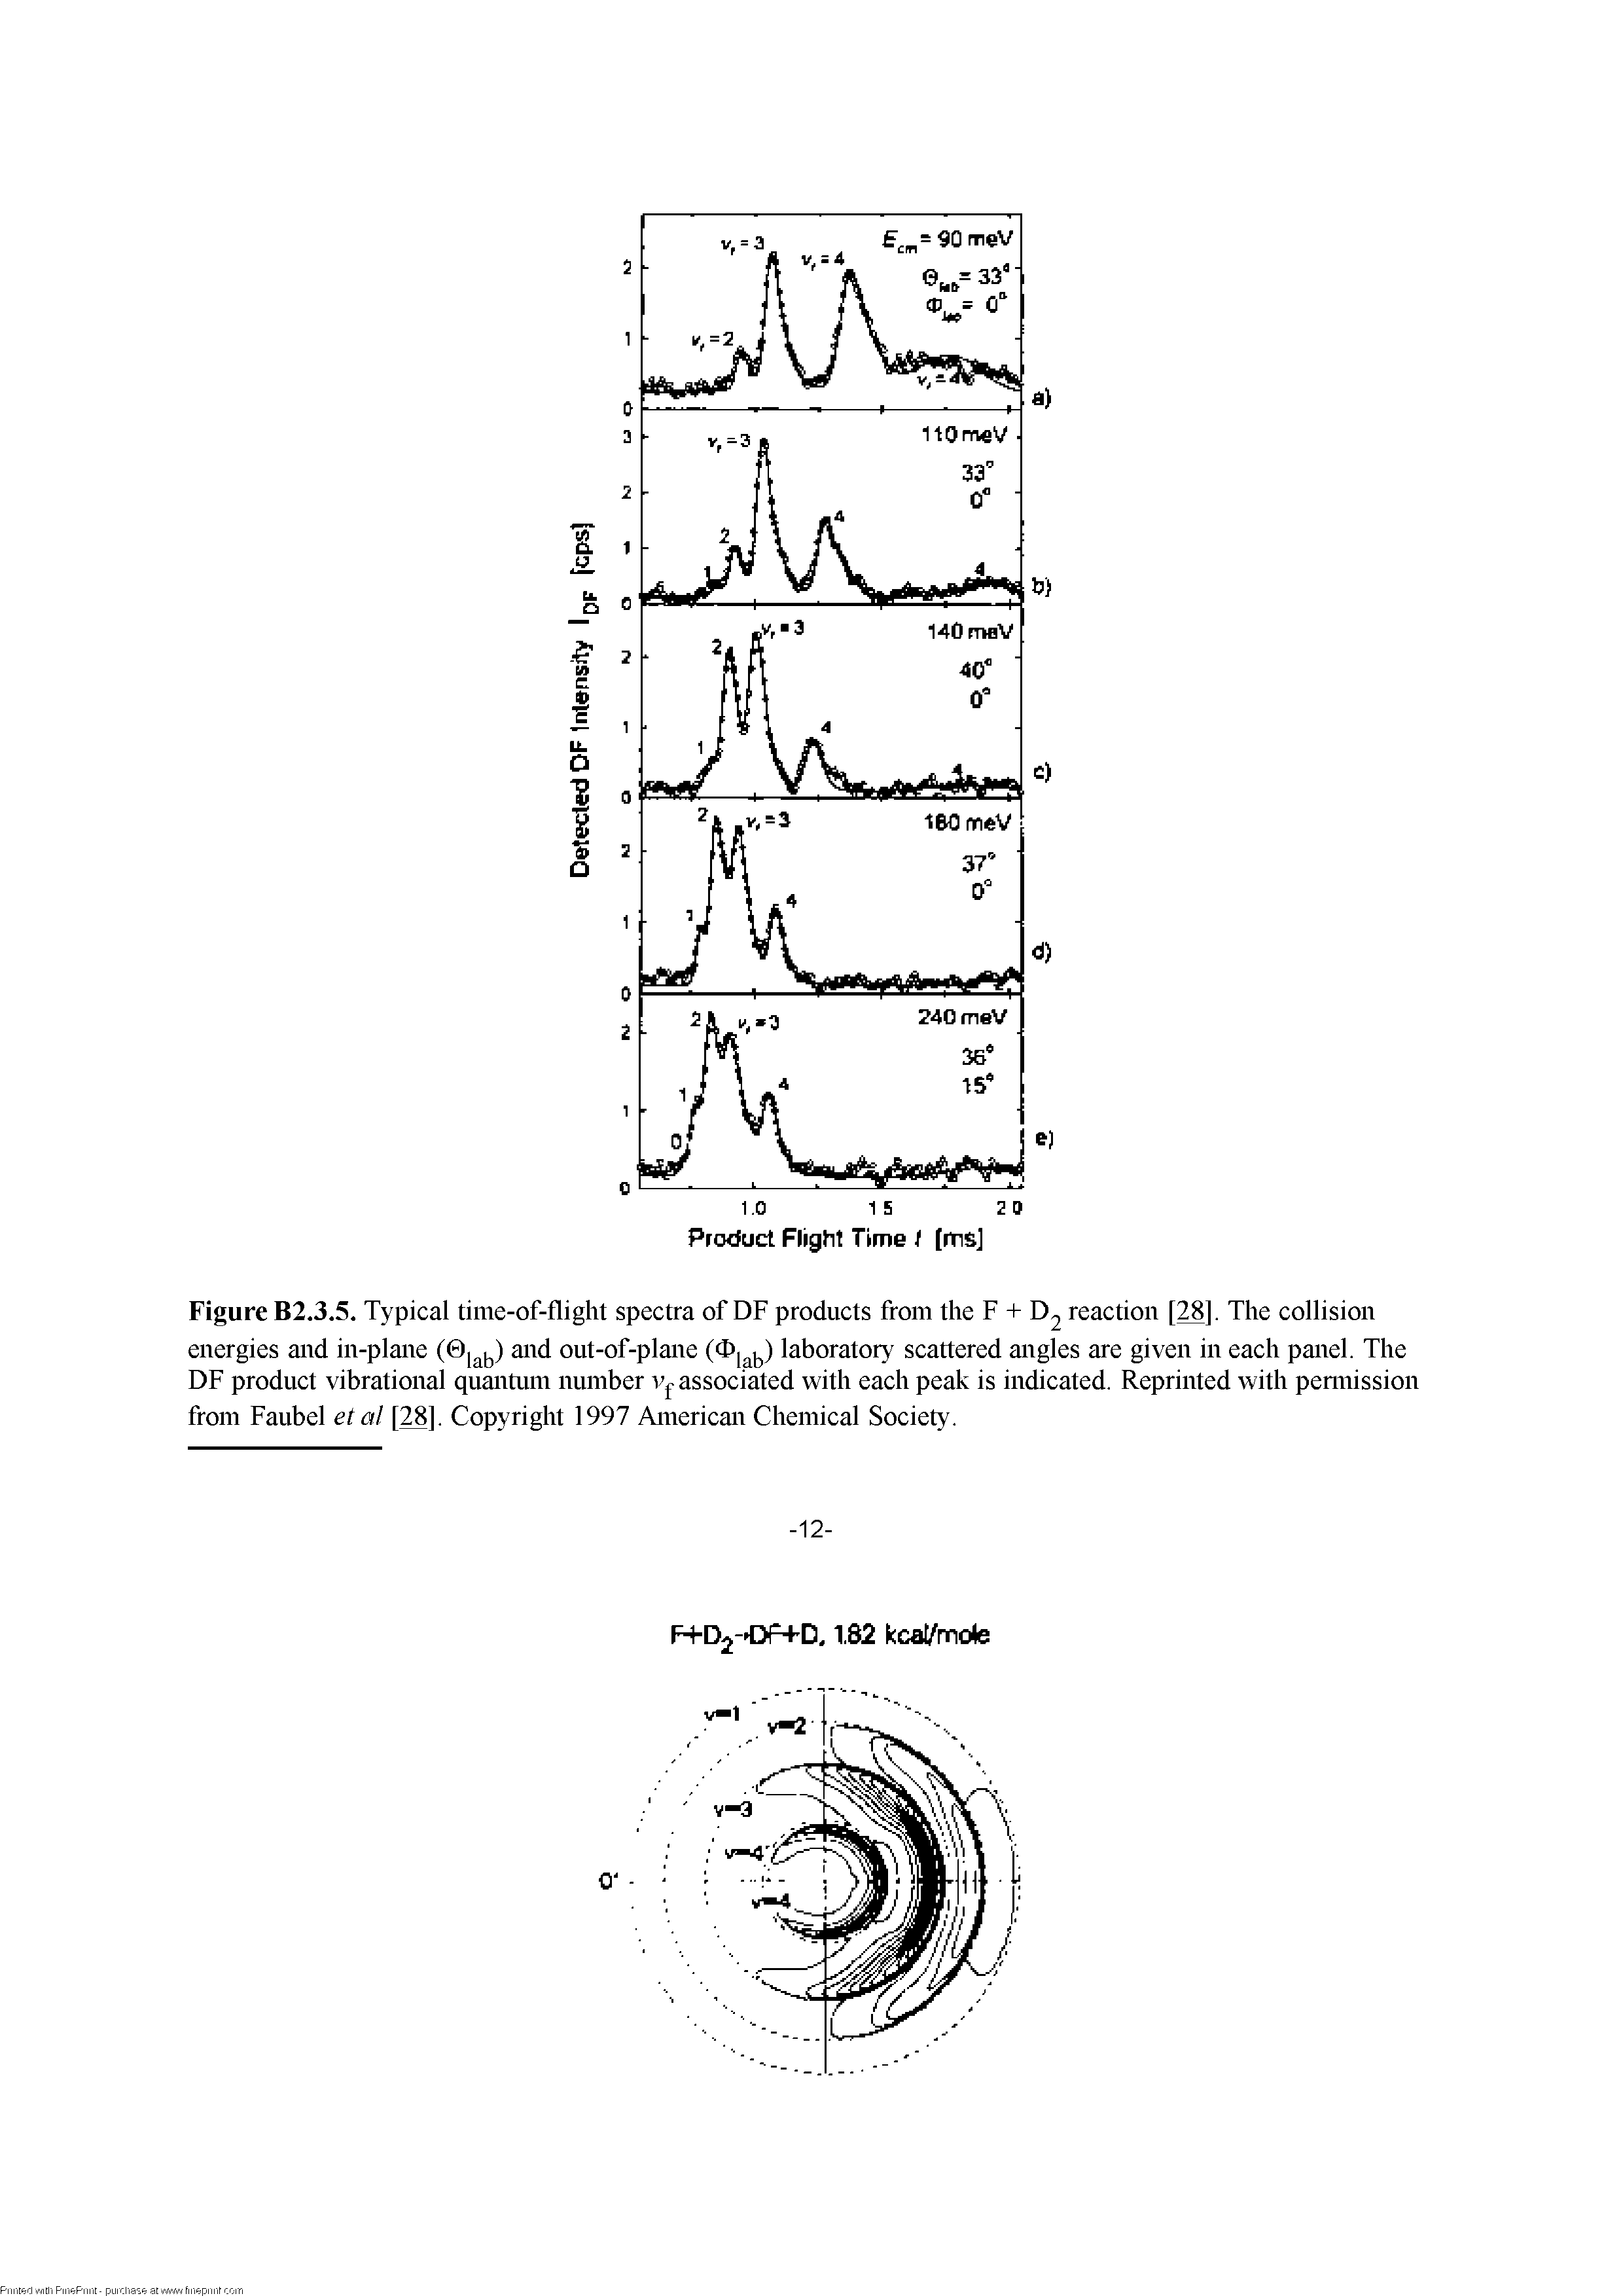 Figure B2.3.5. Typical time-of-flight spectra of DF products from the F + D2 reaction [28]- The collision energies and in-plane and out-of-plane laboratory scattered angles are given in each panel. The DF product vibrational quantum number associated with each peak is indicated. Reprinted with pennission from Faiibel etal [28]. Copyright 1997 American Chemical Society.